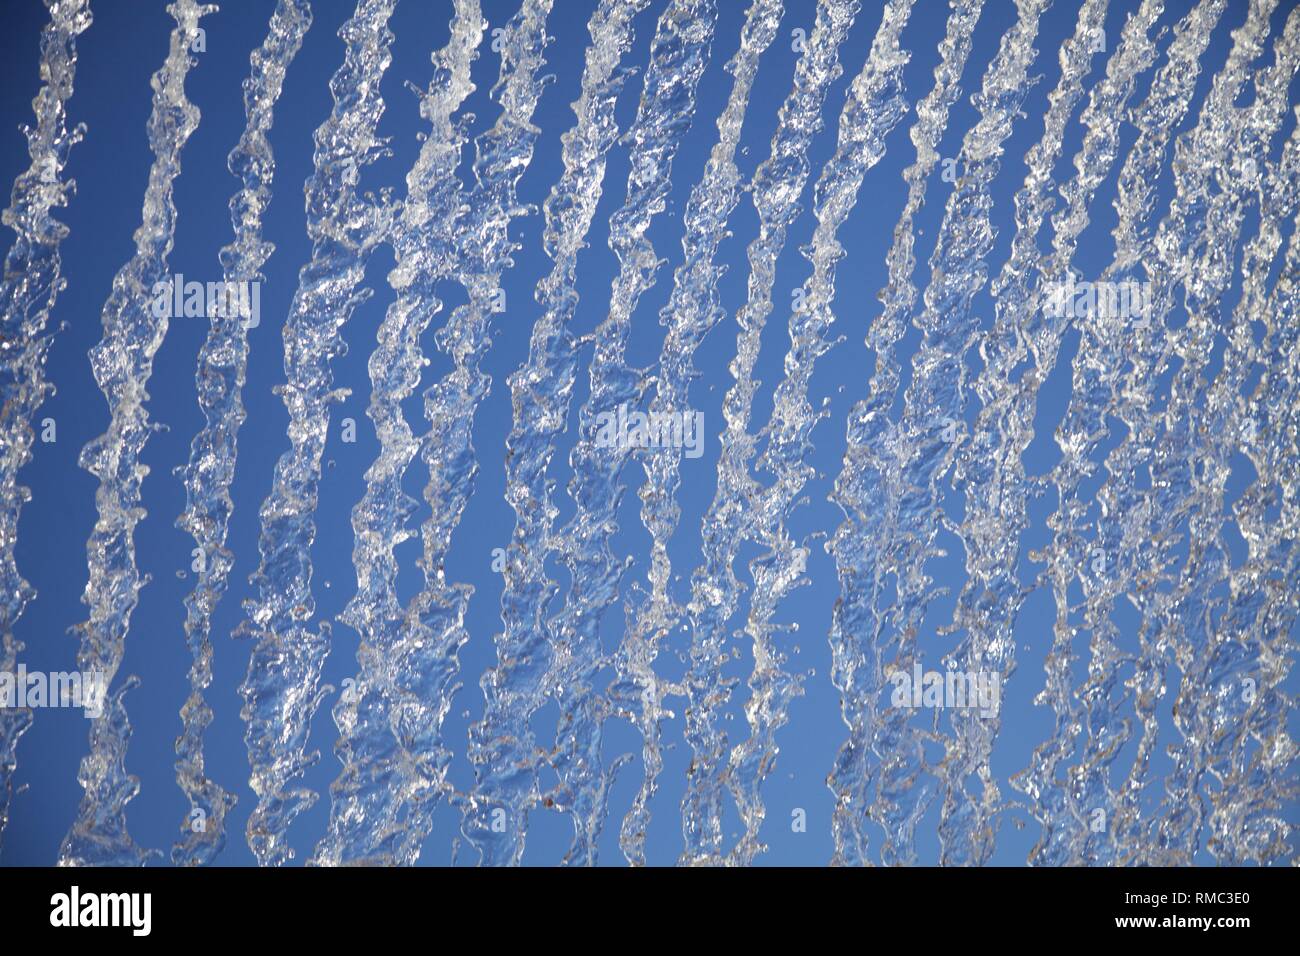 jets of water forming lines on the sky Stock Photo